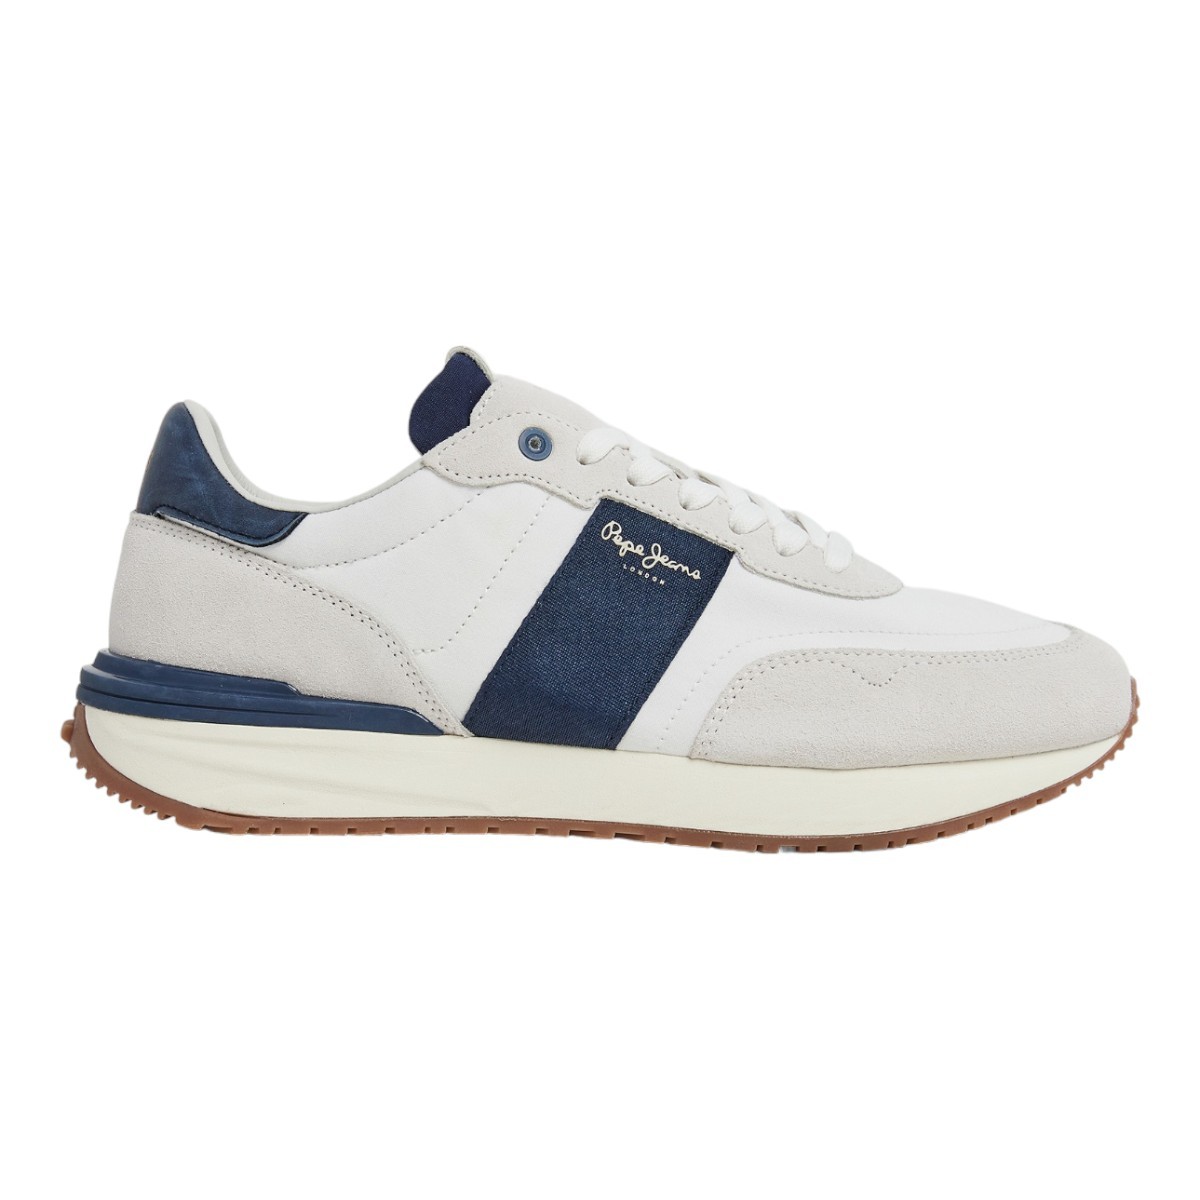 Pepe jeans BUSTER TAPE Sneakers Ανδρικά Παπούτσια PMS60006-800 Λευκό